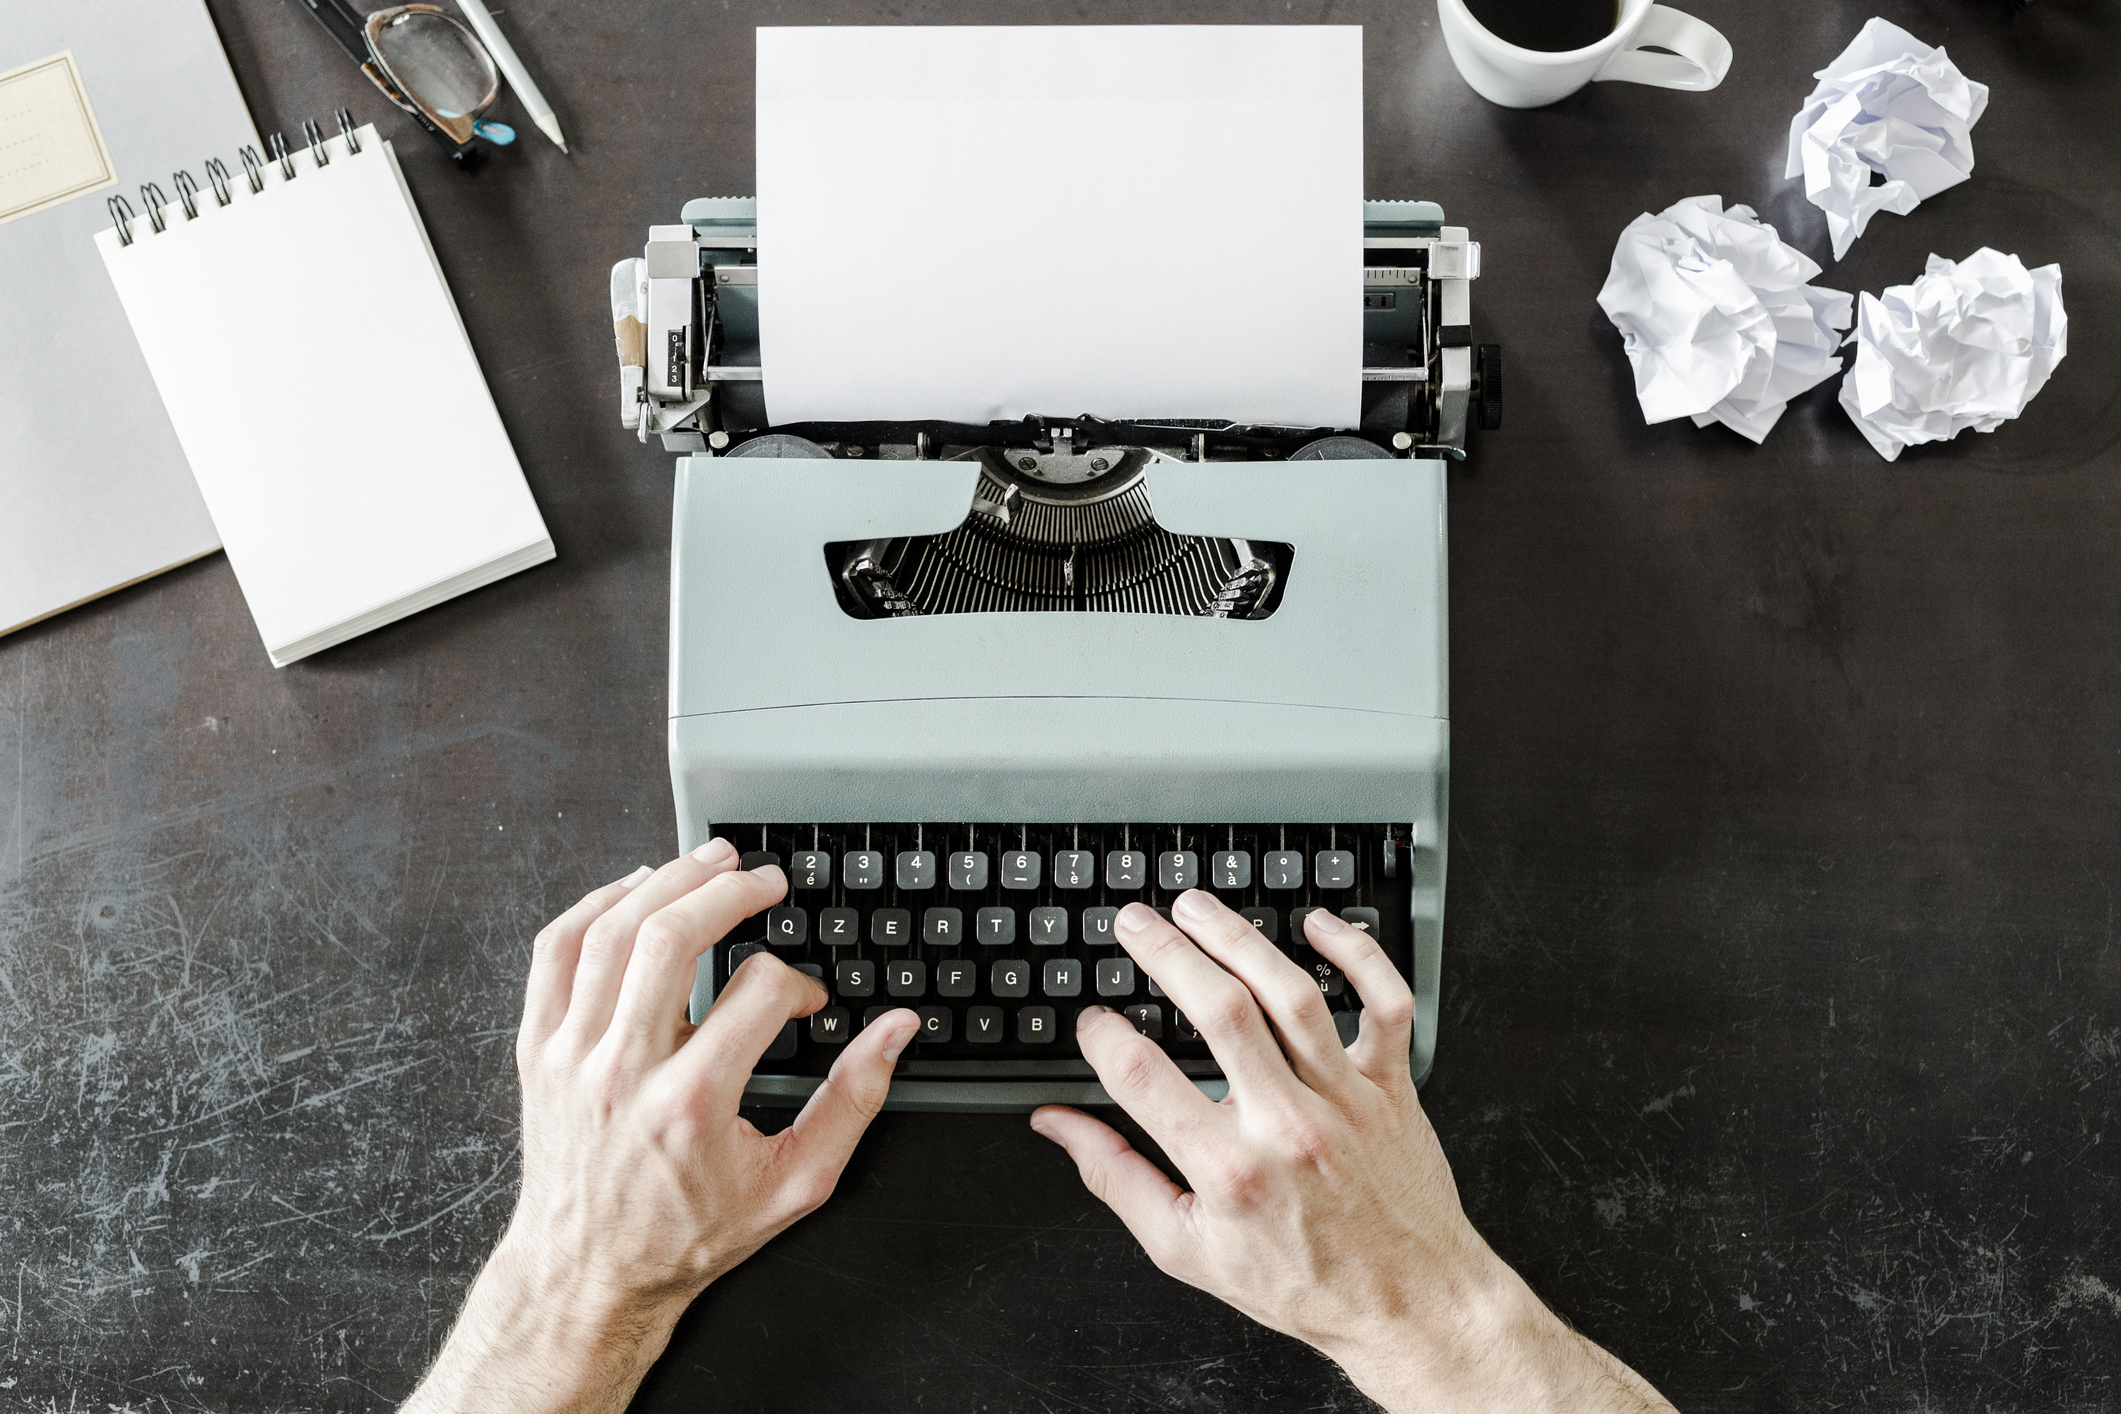 Hands typing on a vintage typewriter with a blank sheet of paper, surrounded by crumpled paper balls, a notebook, and a coffee cup